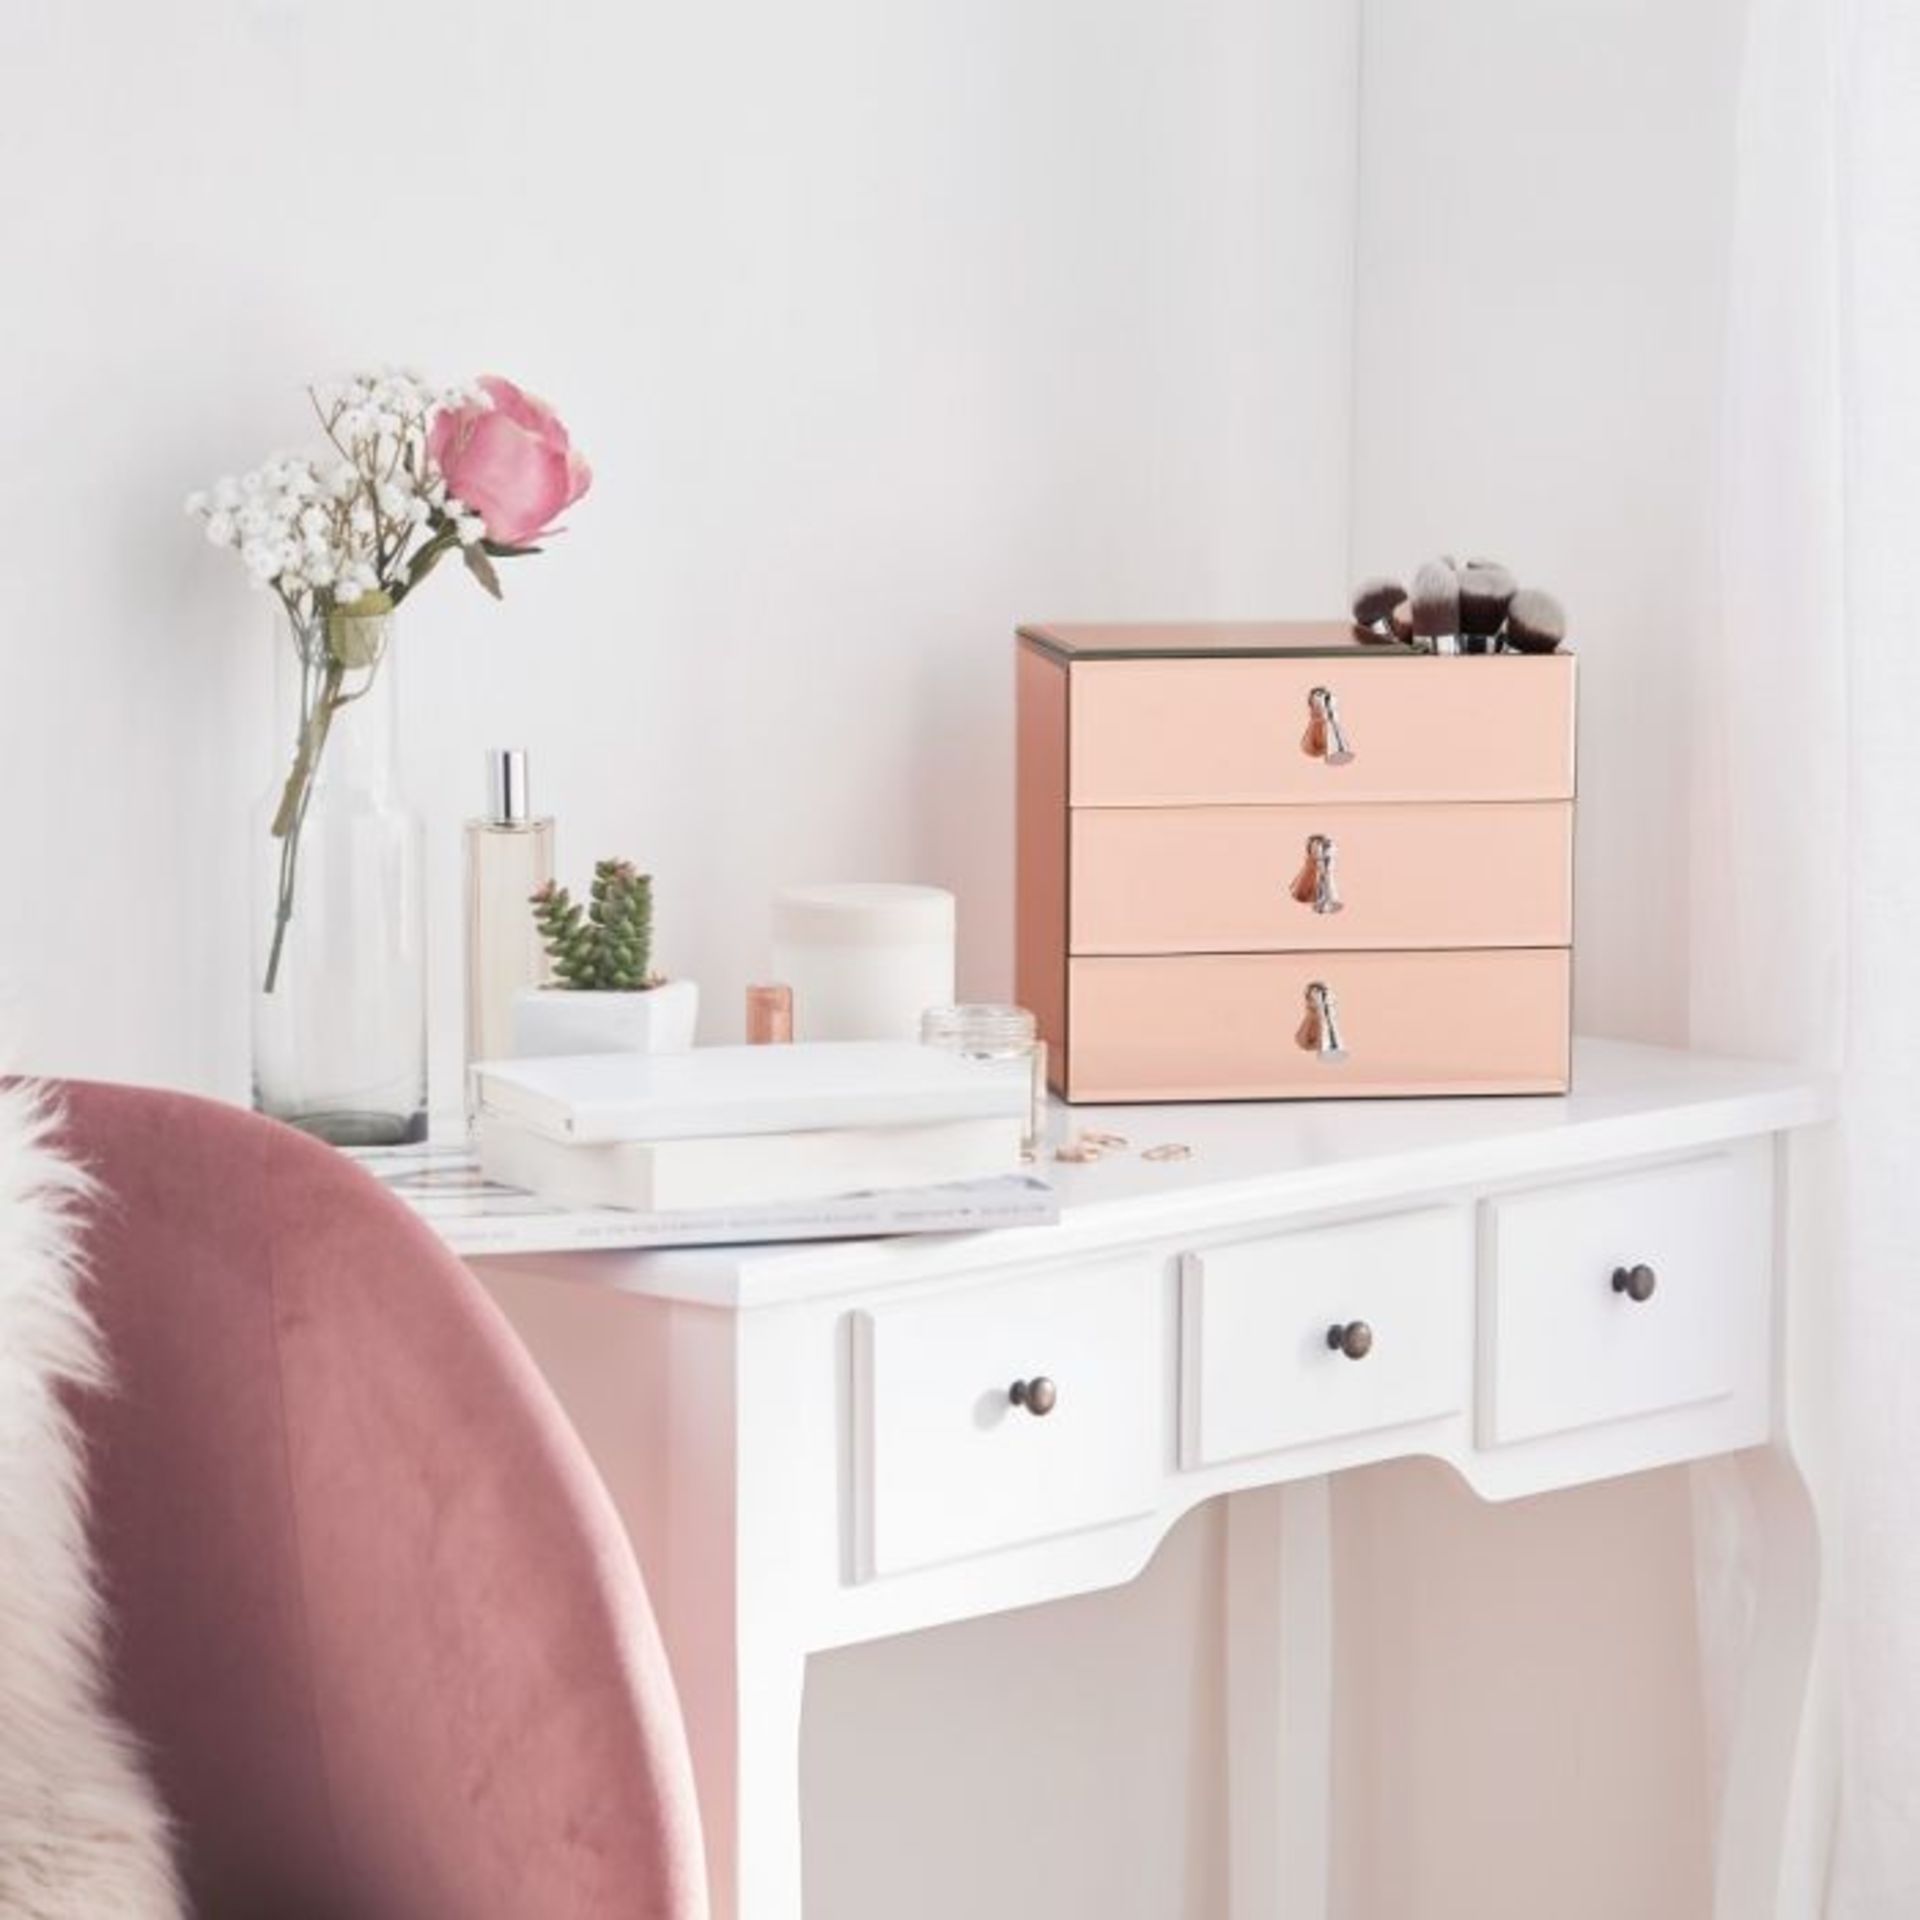 (V165) Rose Gold 3 Drawer Mirrored Jewellery Organiser. The perfect place to hide away clutter... - Image 2 of 4